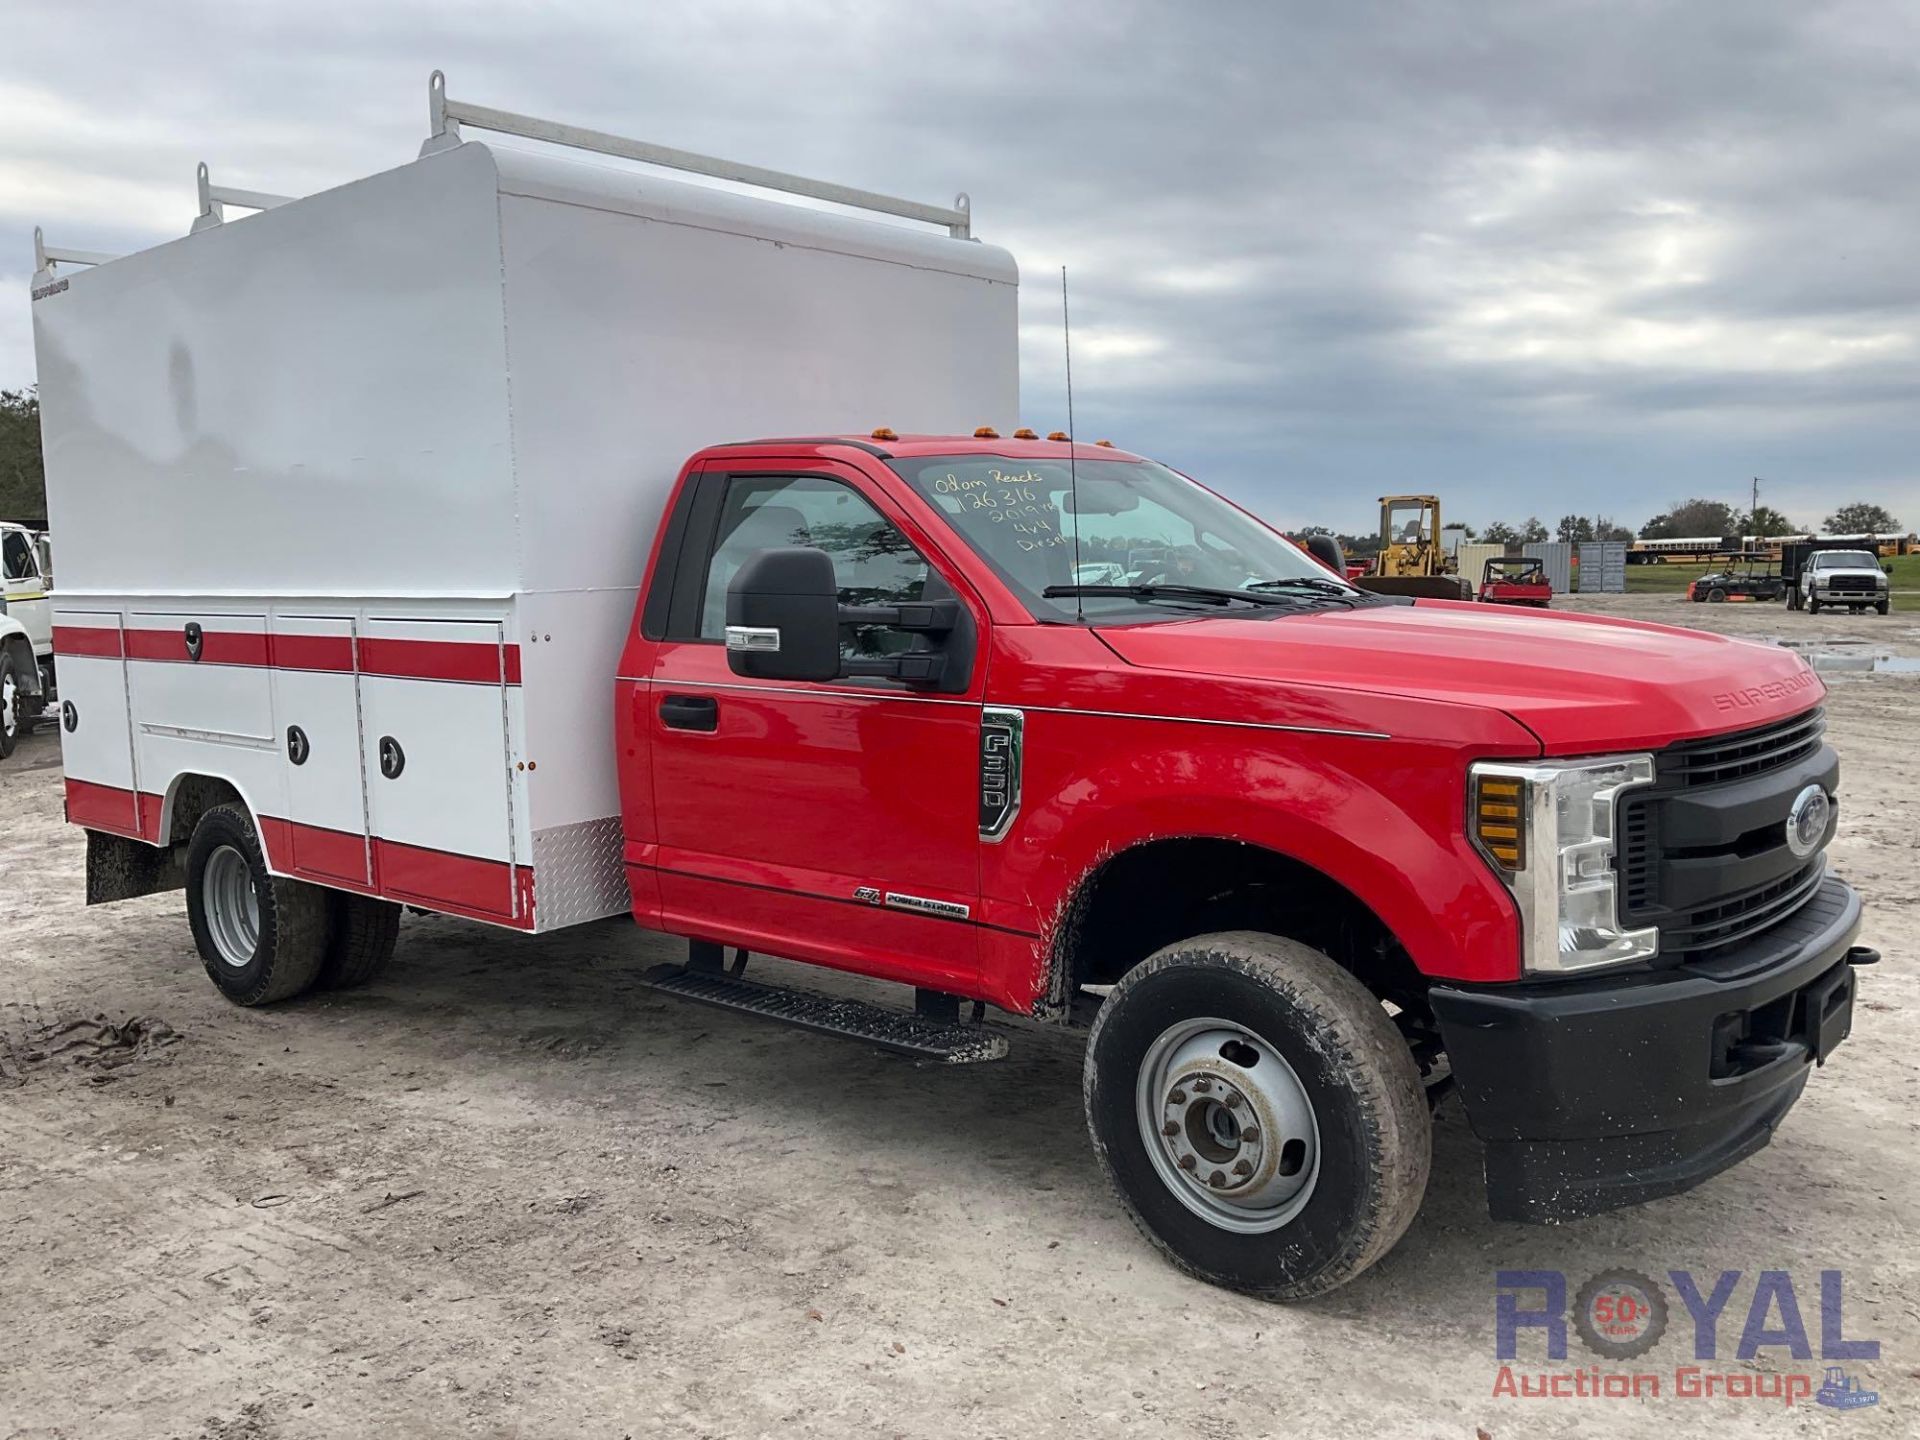 2019 Ford F350 4x4 Service Truck - Image 2 of 30